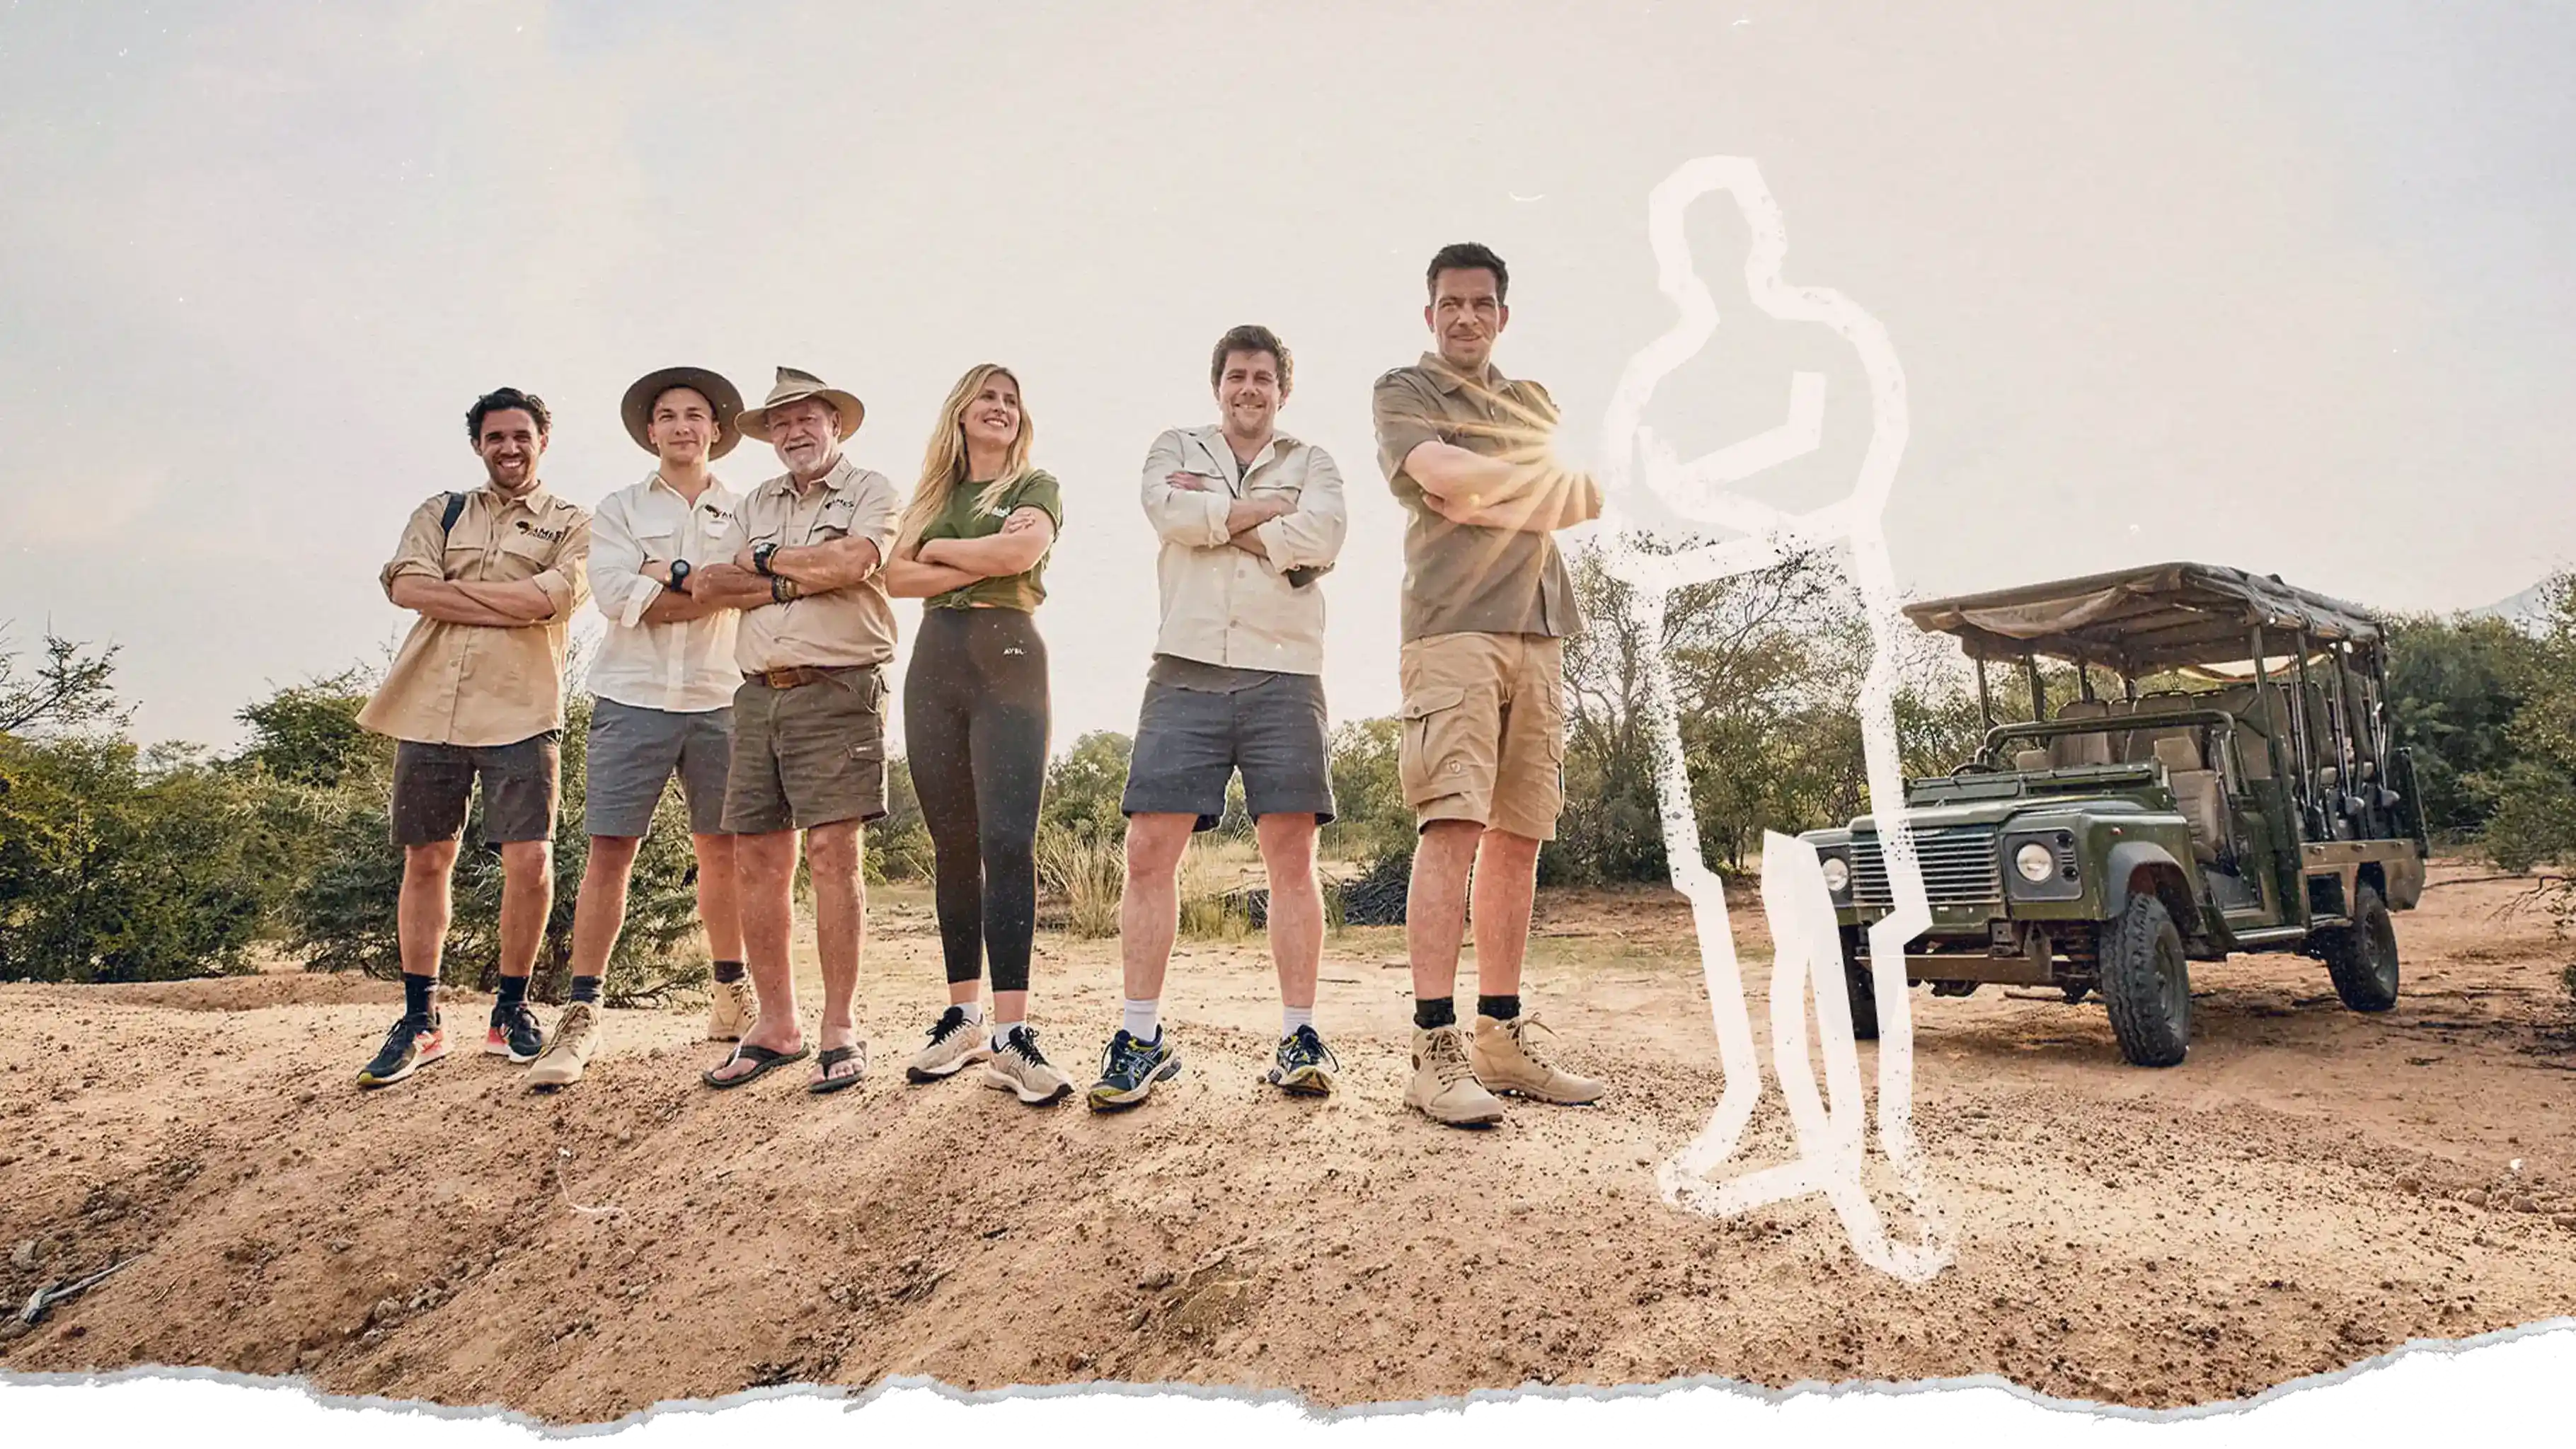 (Co)Founding team and Les Brett posing infront of safari truck with sketched outline of a person on torn paper background